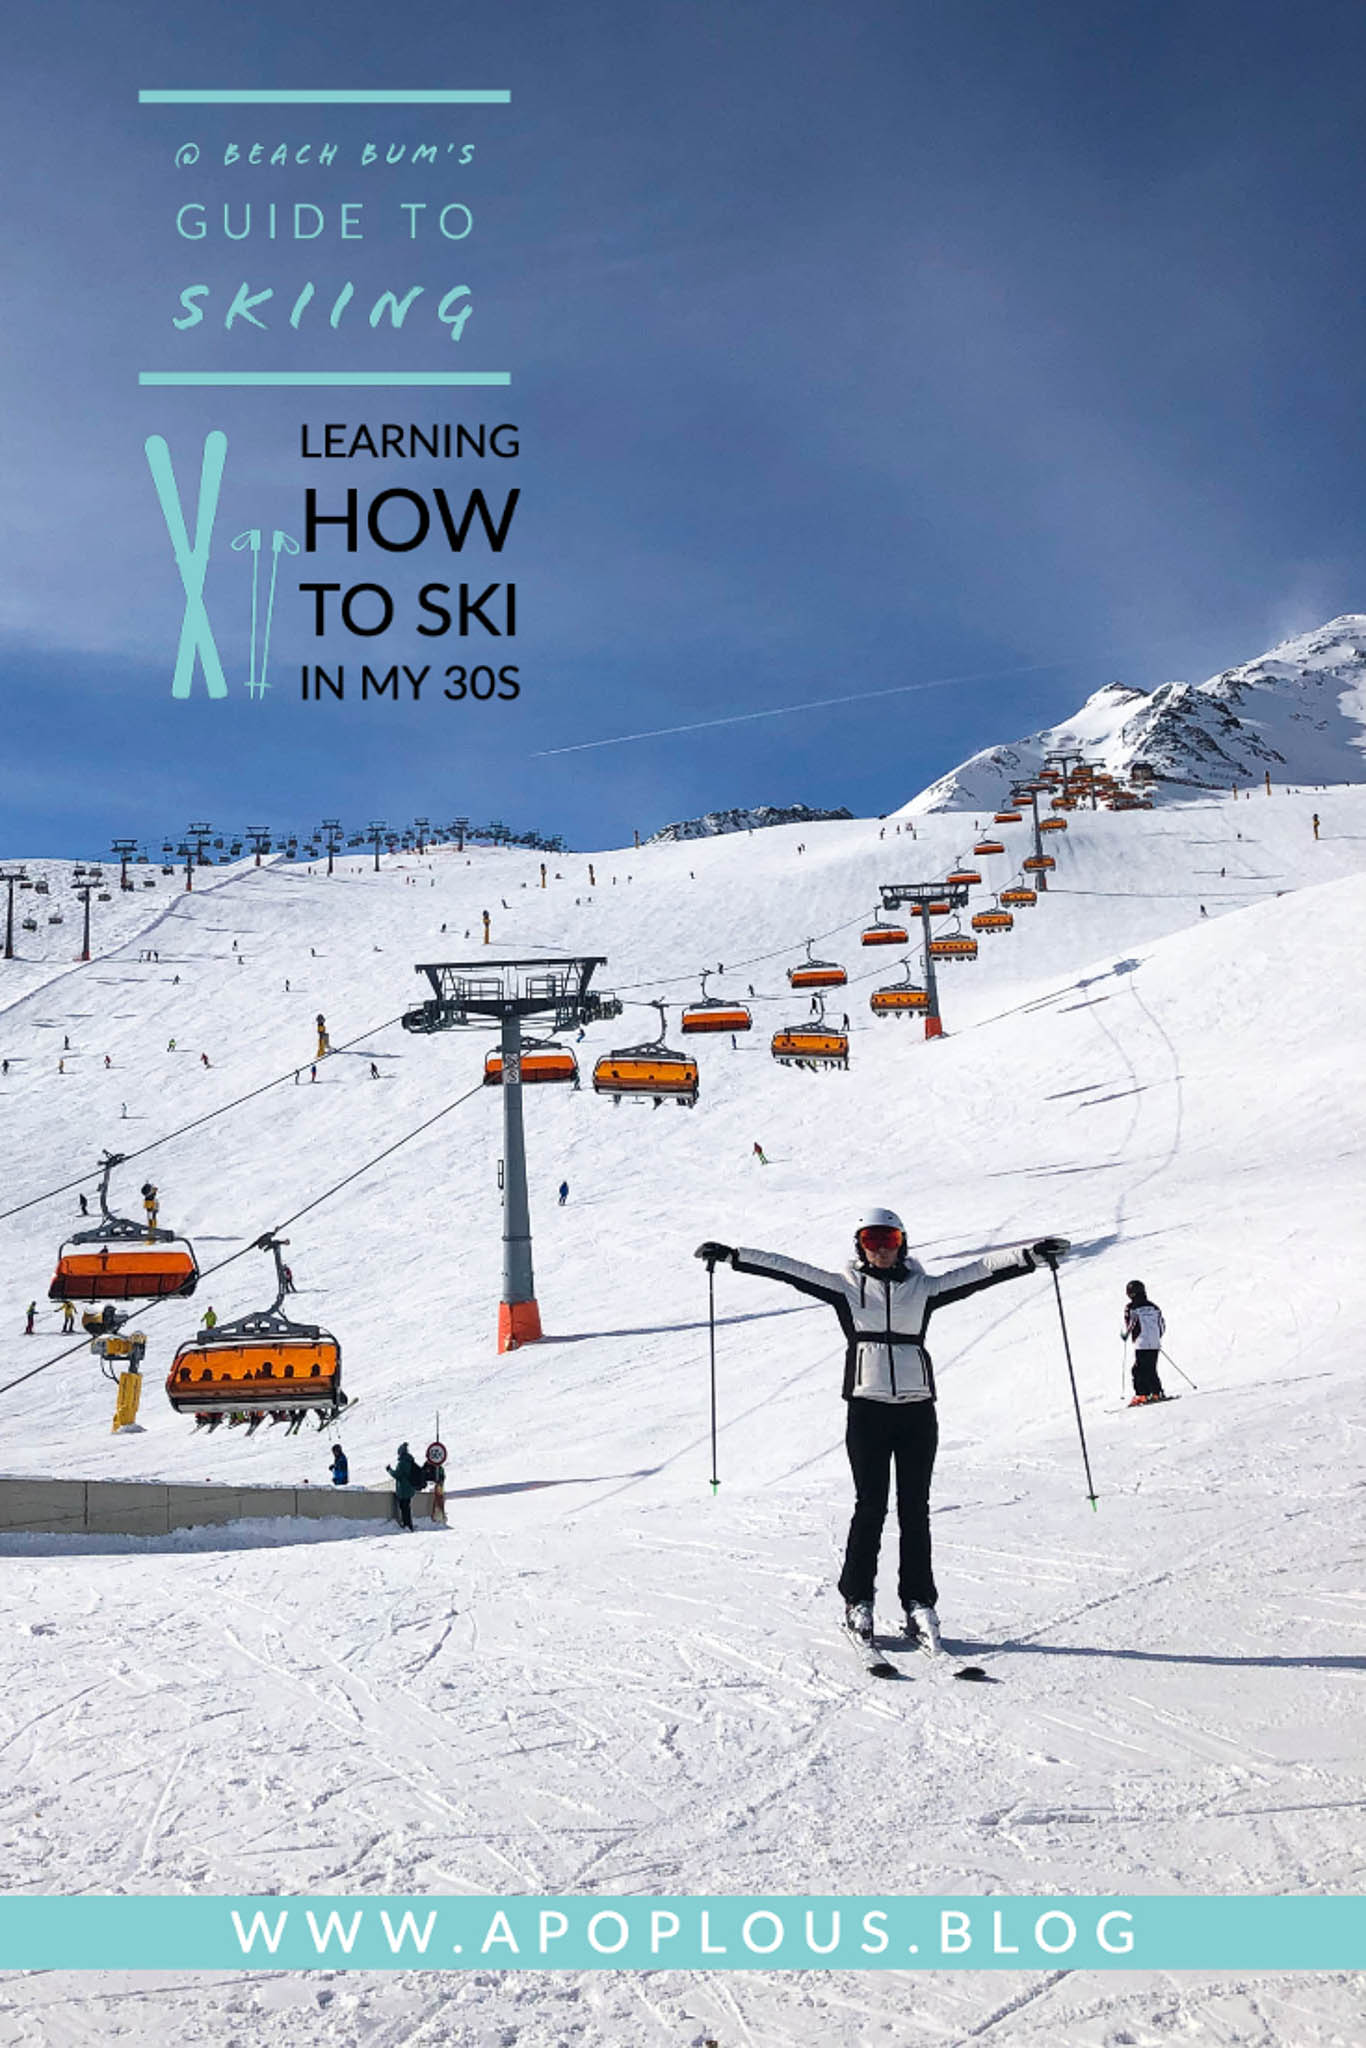 Learning how to ski in my 30s | APOPLOUS